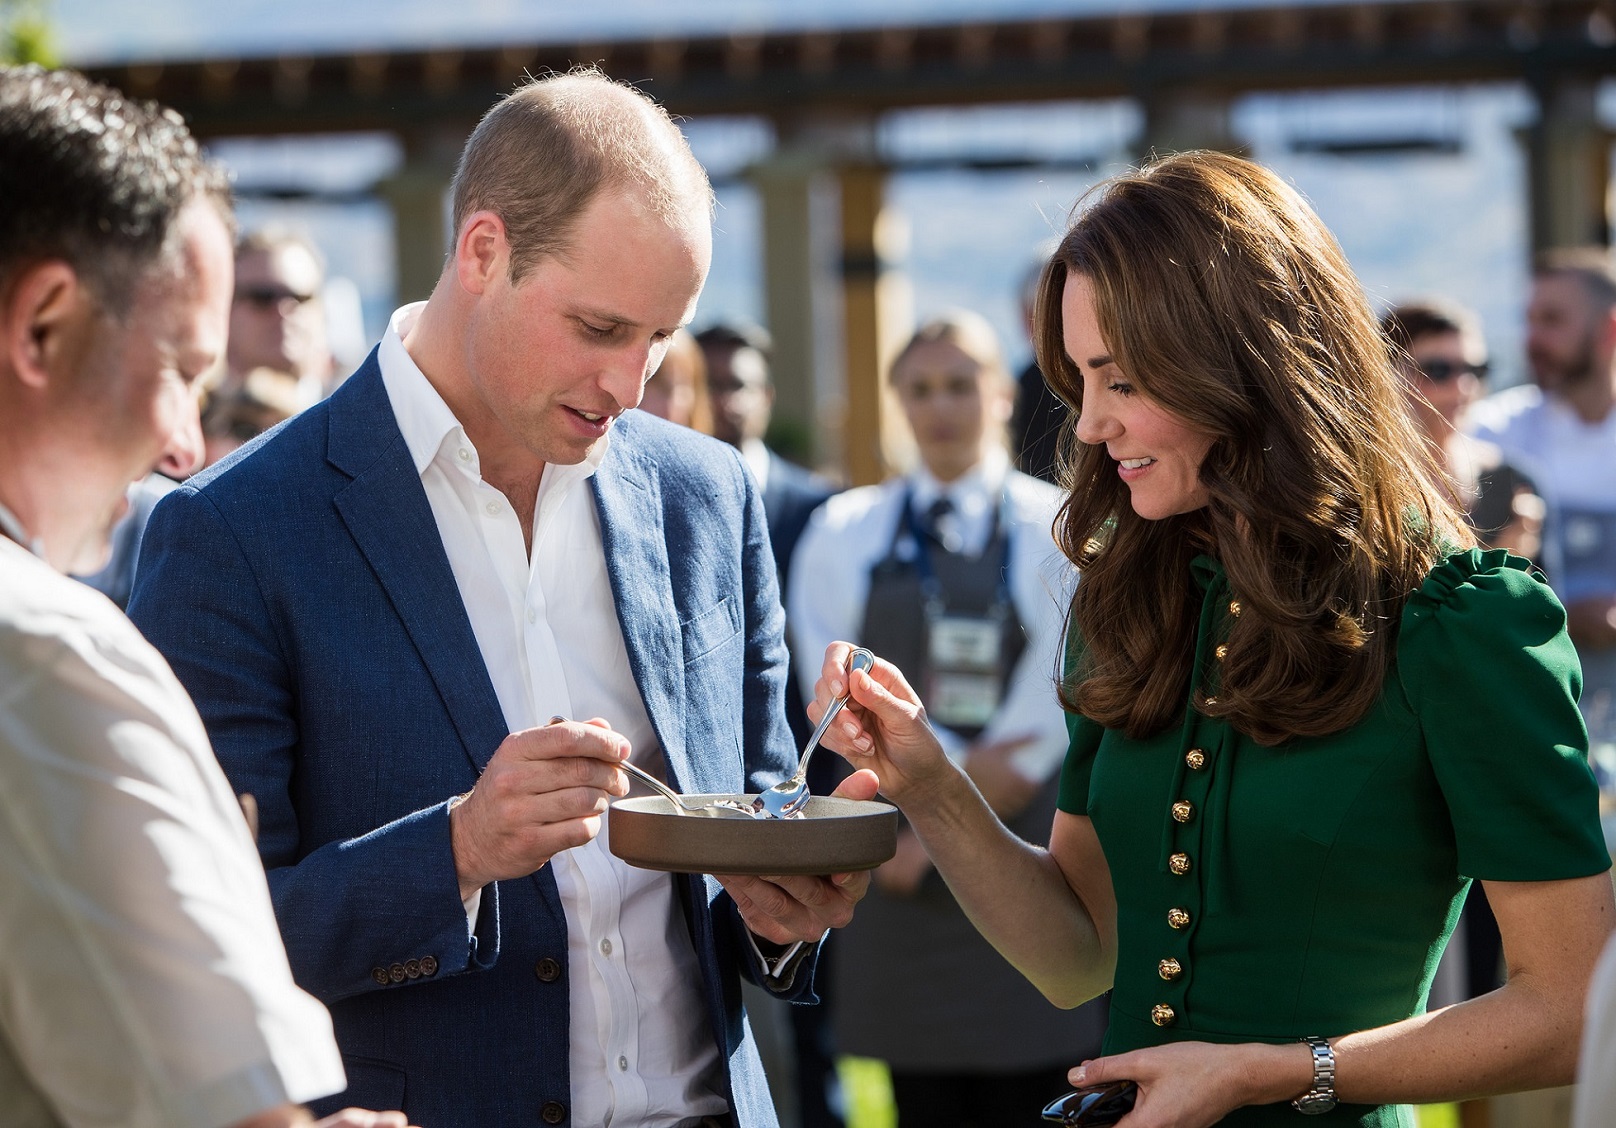 The Duke and Duchess sampled the best of B.C. cuisine at the Taste of BC reception in West Kelowna.